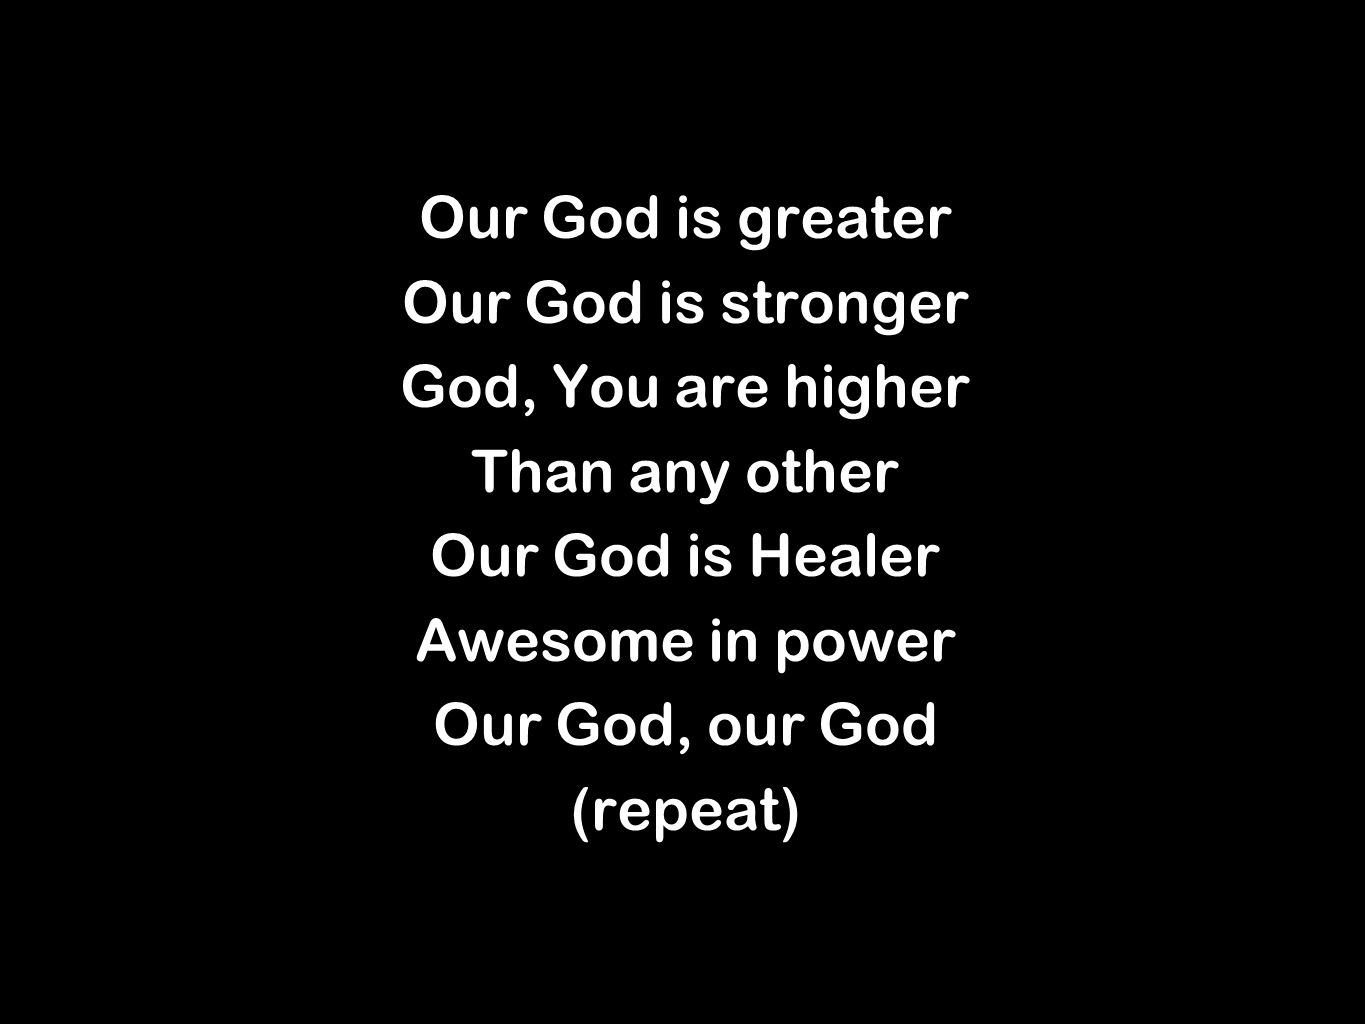 Our God is greater Our God is stronger God, You are higher Than any other Our God is Healer Awesome in power Our God, our God (repeat) Our God is greater Our God is stronger God, You are higher Than any other Our God is Healer Awesome in power Our God, our God (repeat)